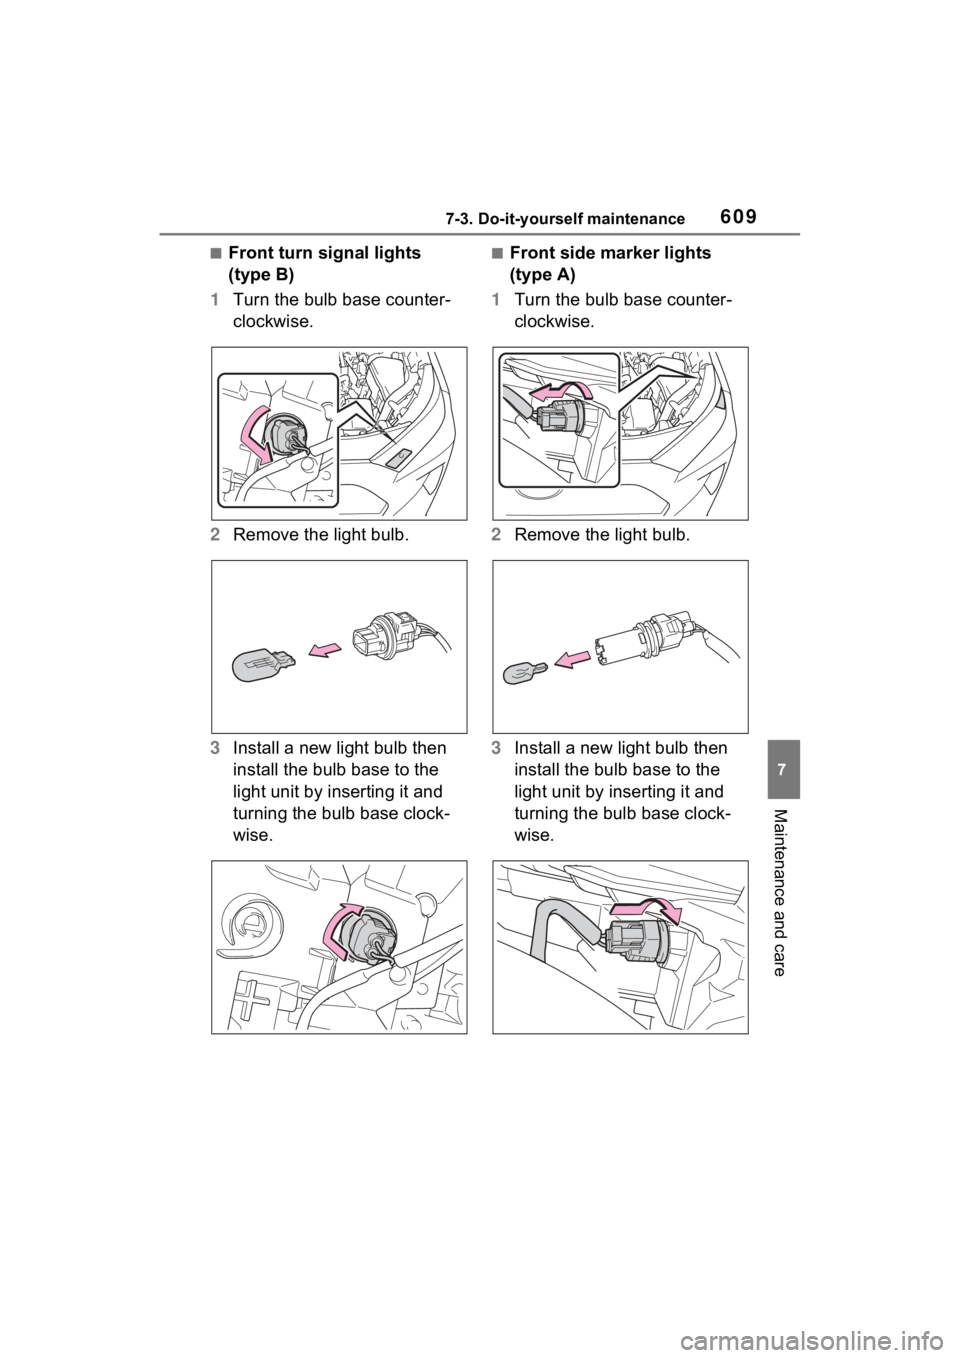 TOYOTA RAV4 HYBRID 2022 User Guide 6097-3. Do-it-yourself maintenance
7
Maintenance and care
■Front turn signal lights 
(type B)
1 Turn the bulb base counter-
clockwise.
2 Remove the light bulb.
3 Install a new light bulb then 
insta